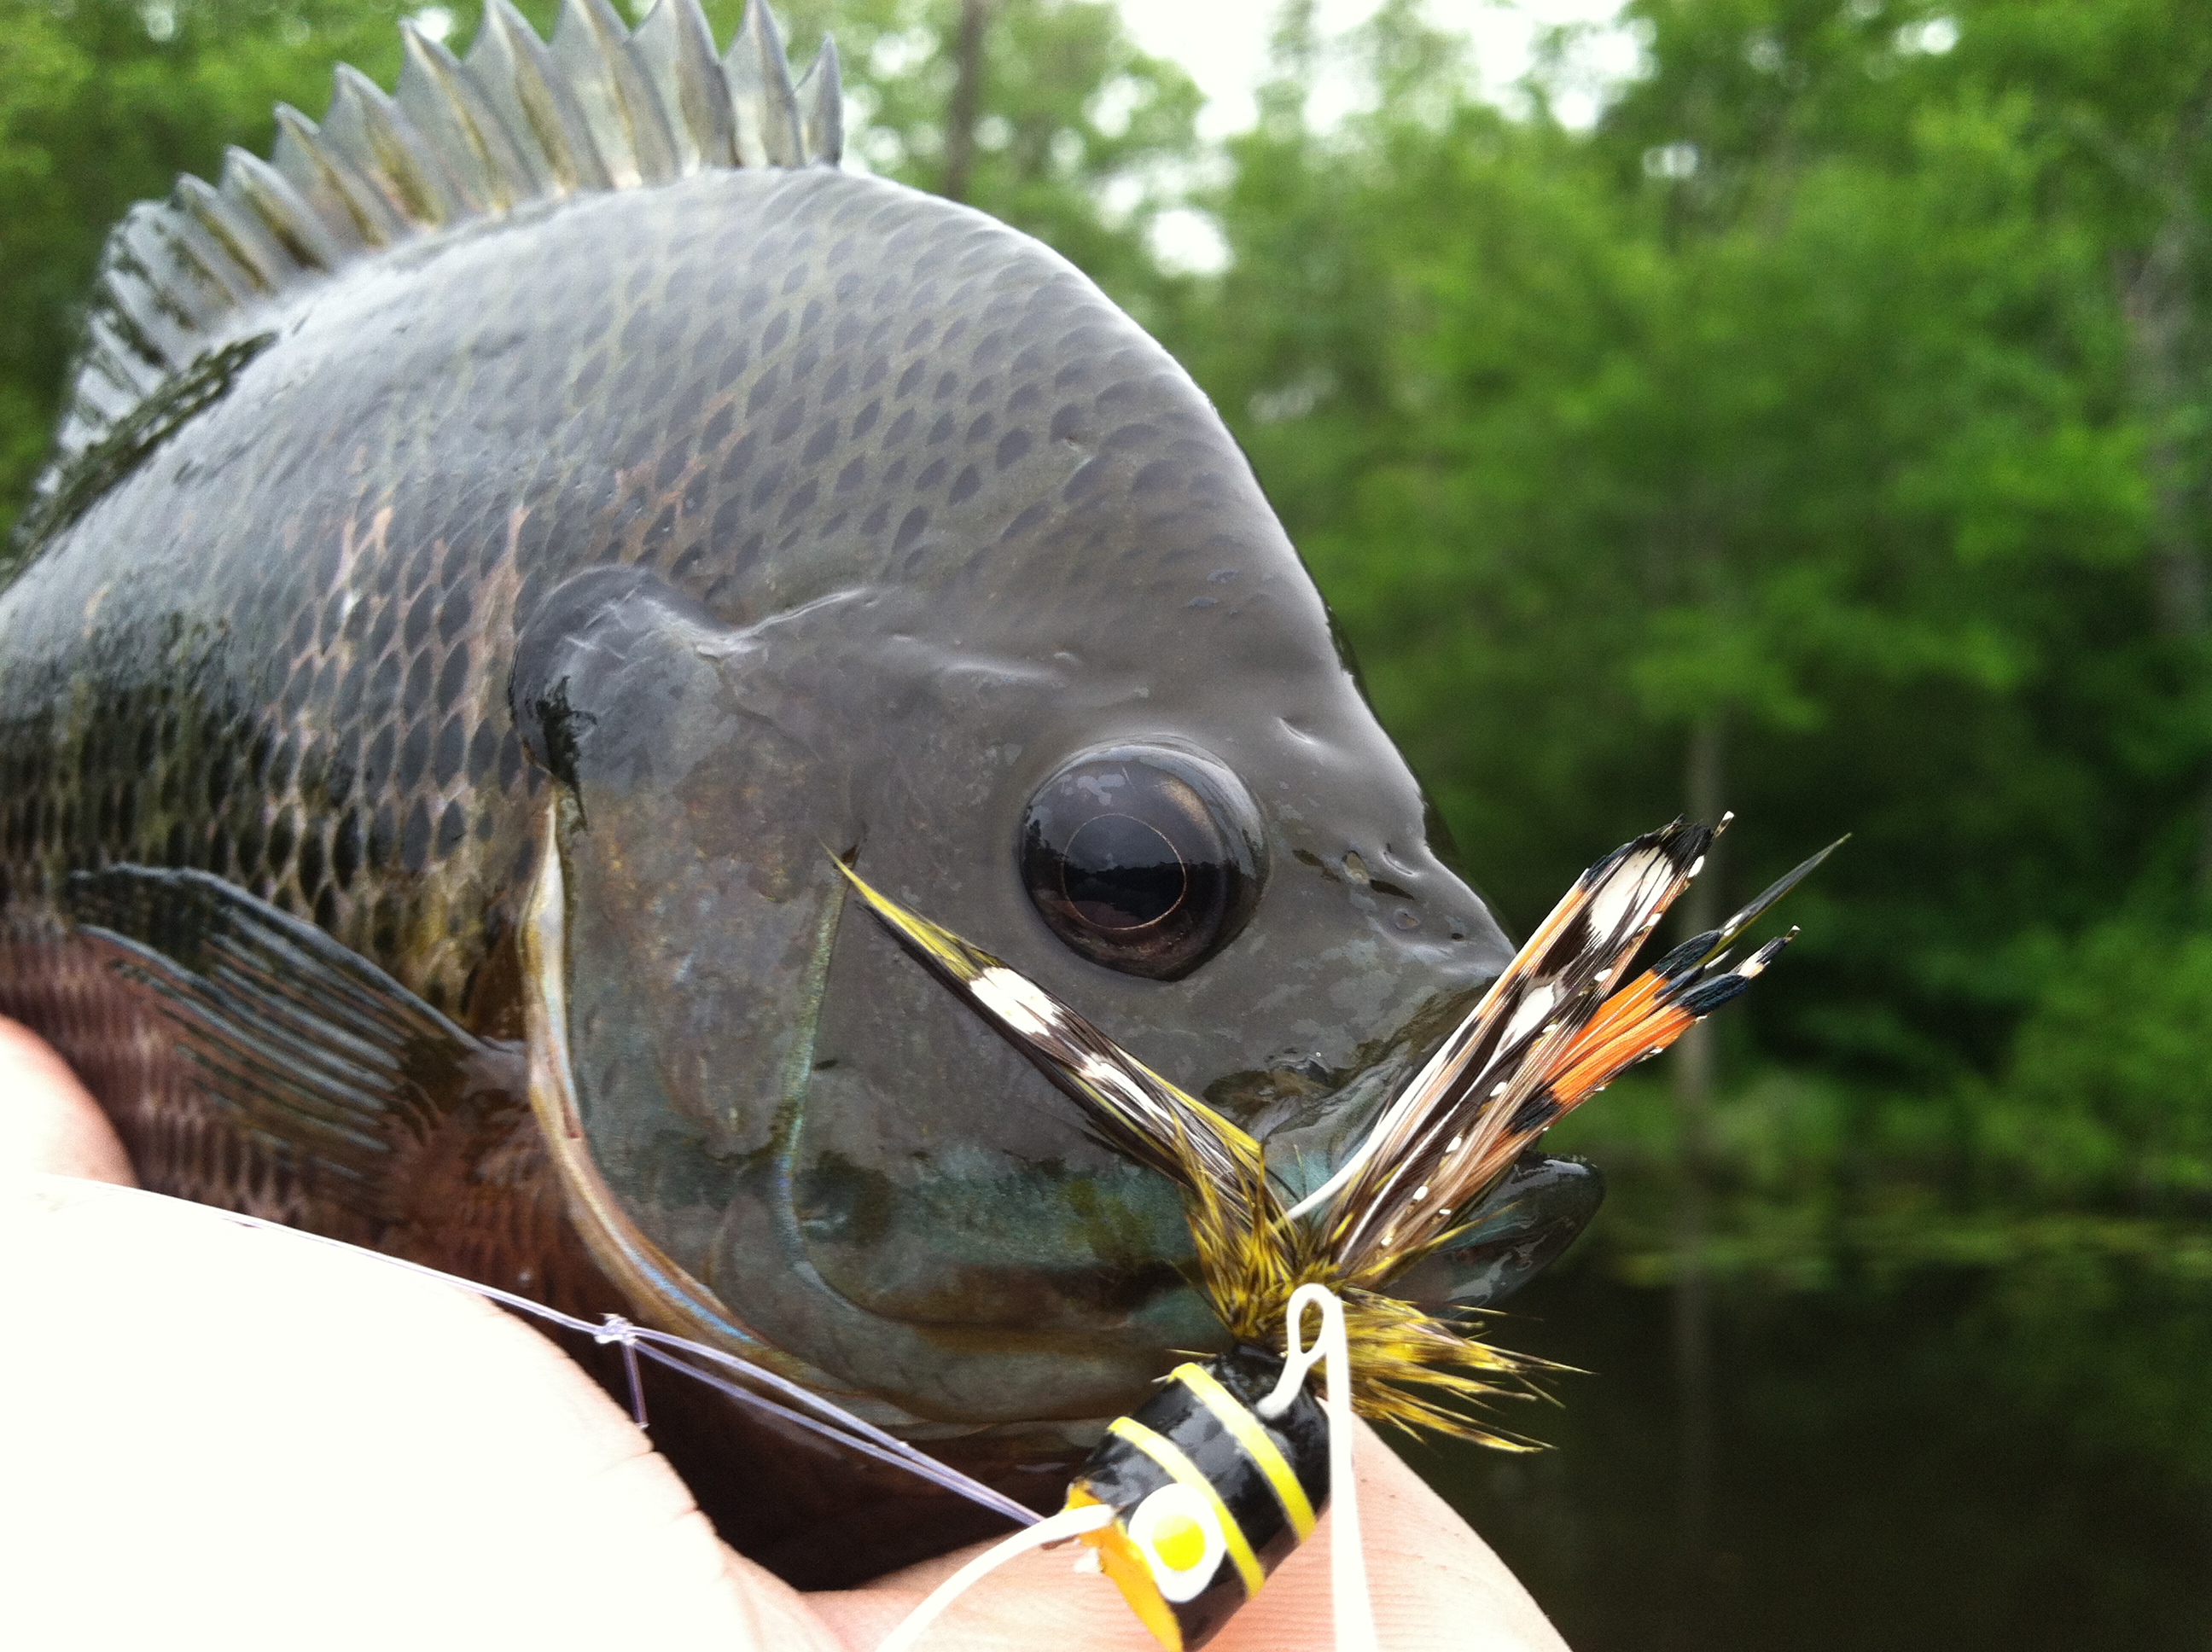 Fly rods, popping bugs and bluegill are summer staples for